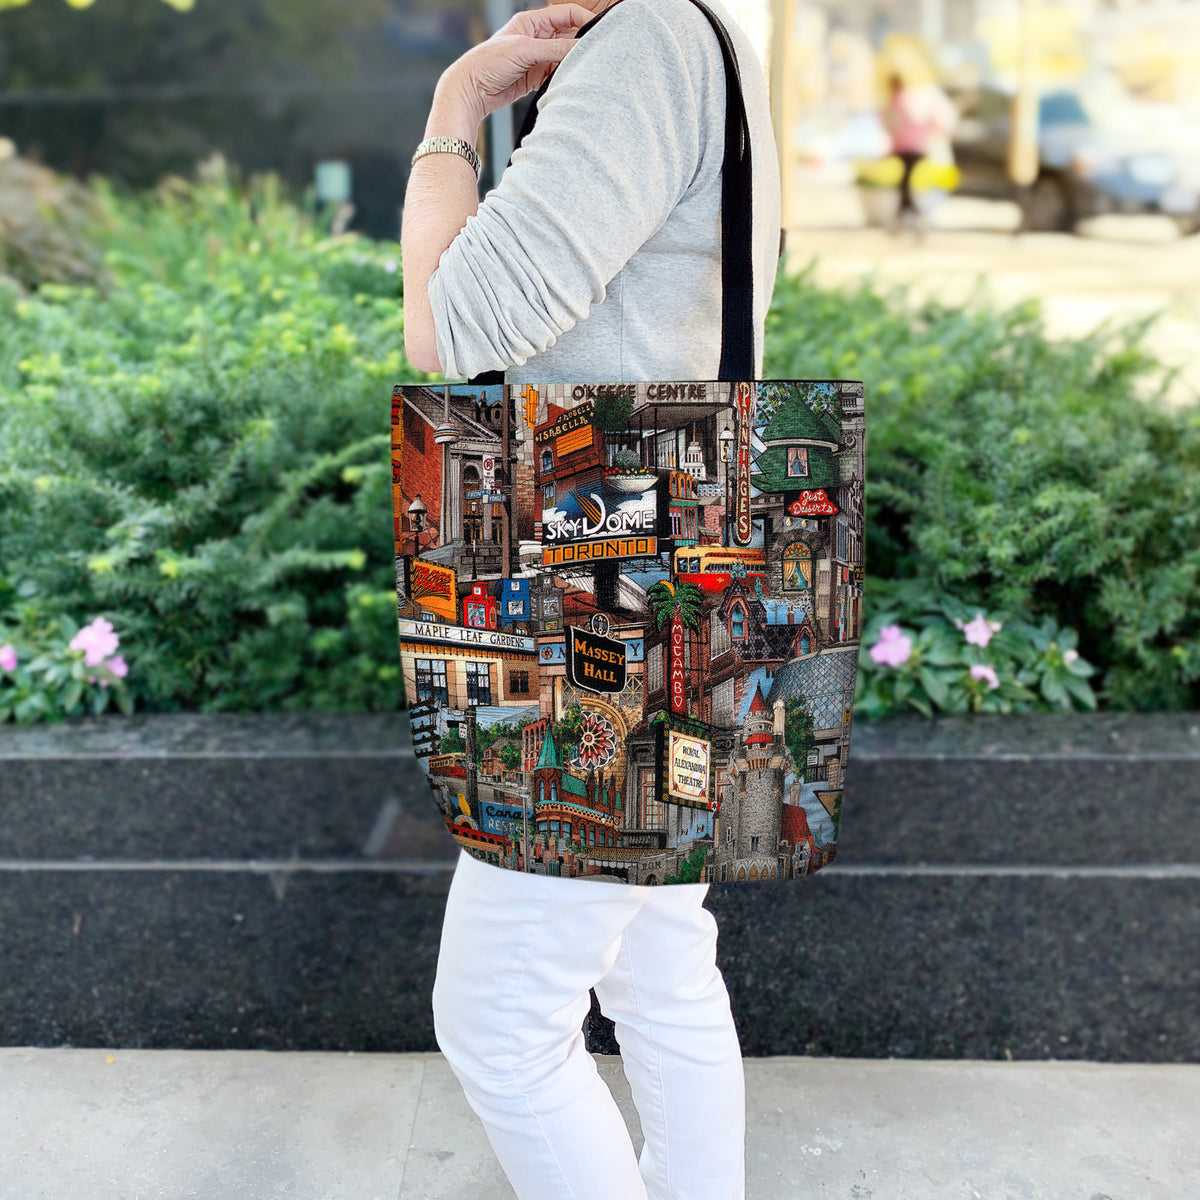 My Toronto Canvas Tote Bag worn by a woman against a hedge